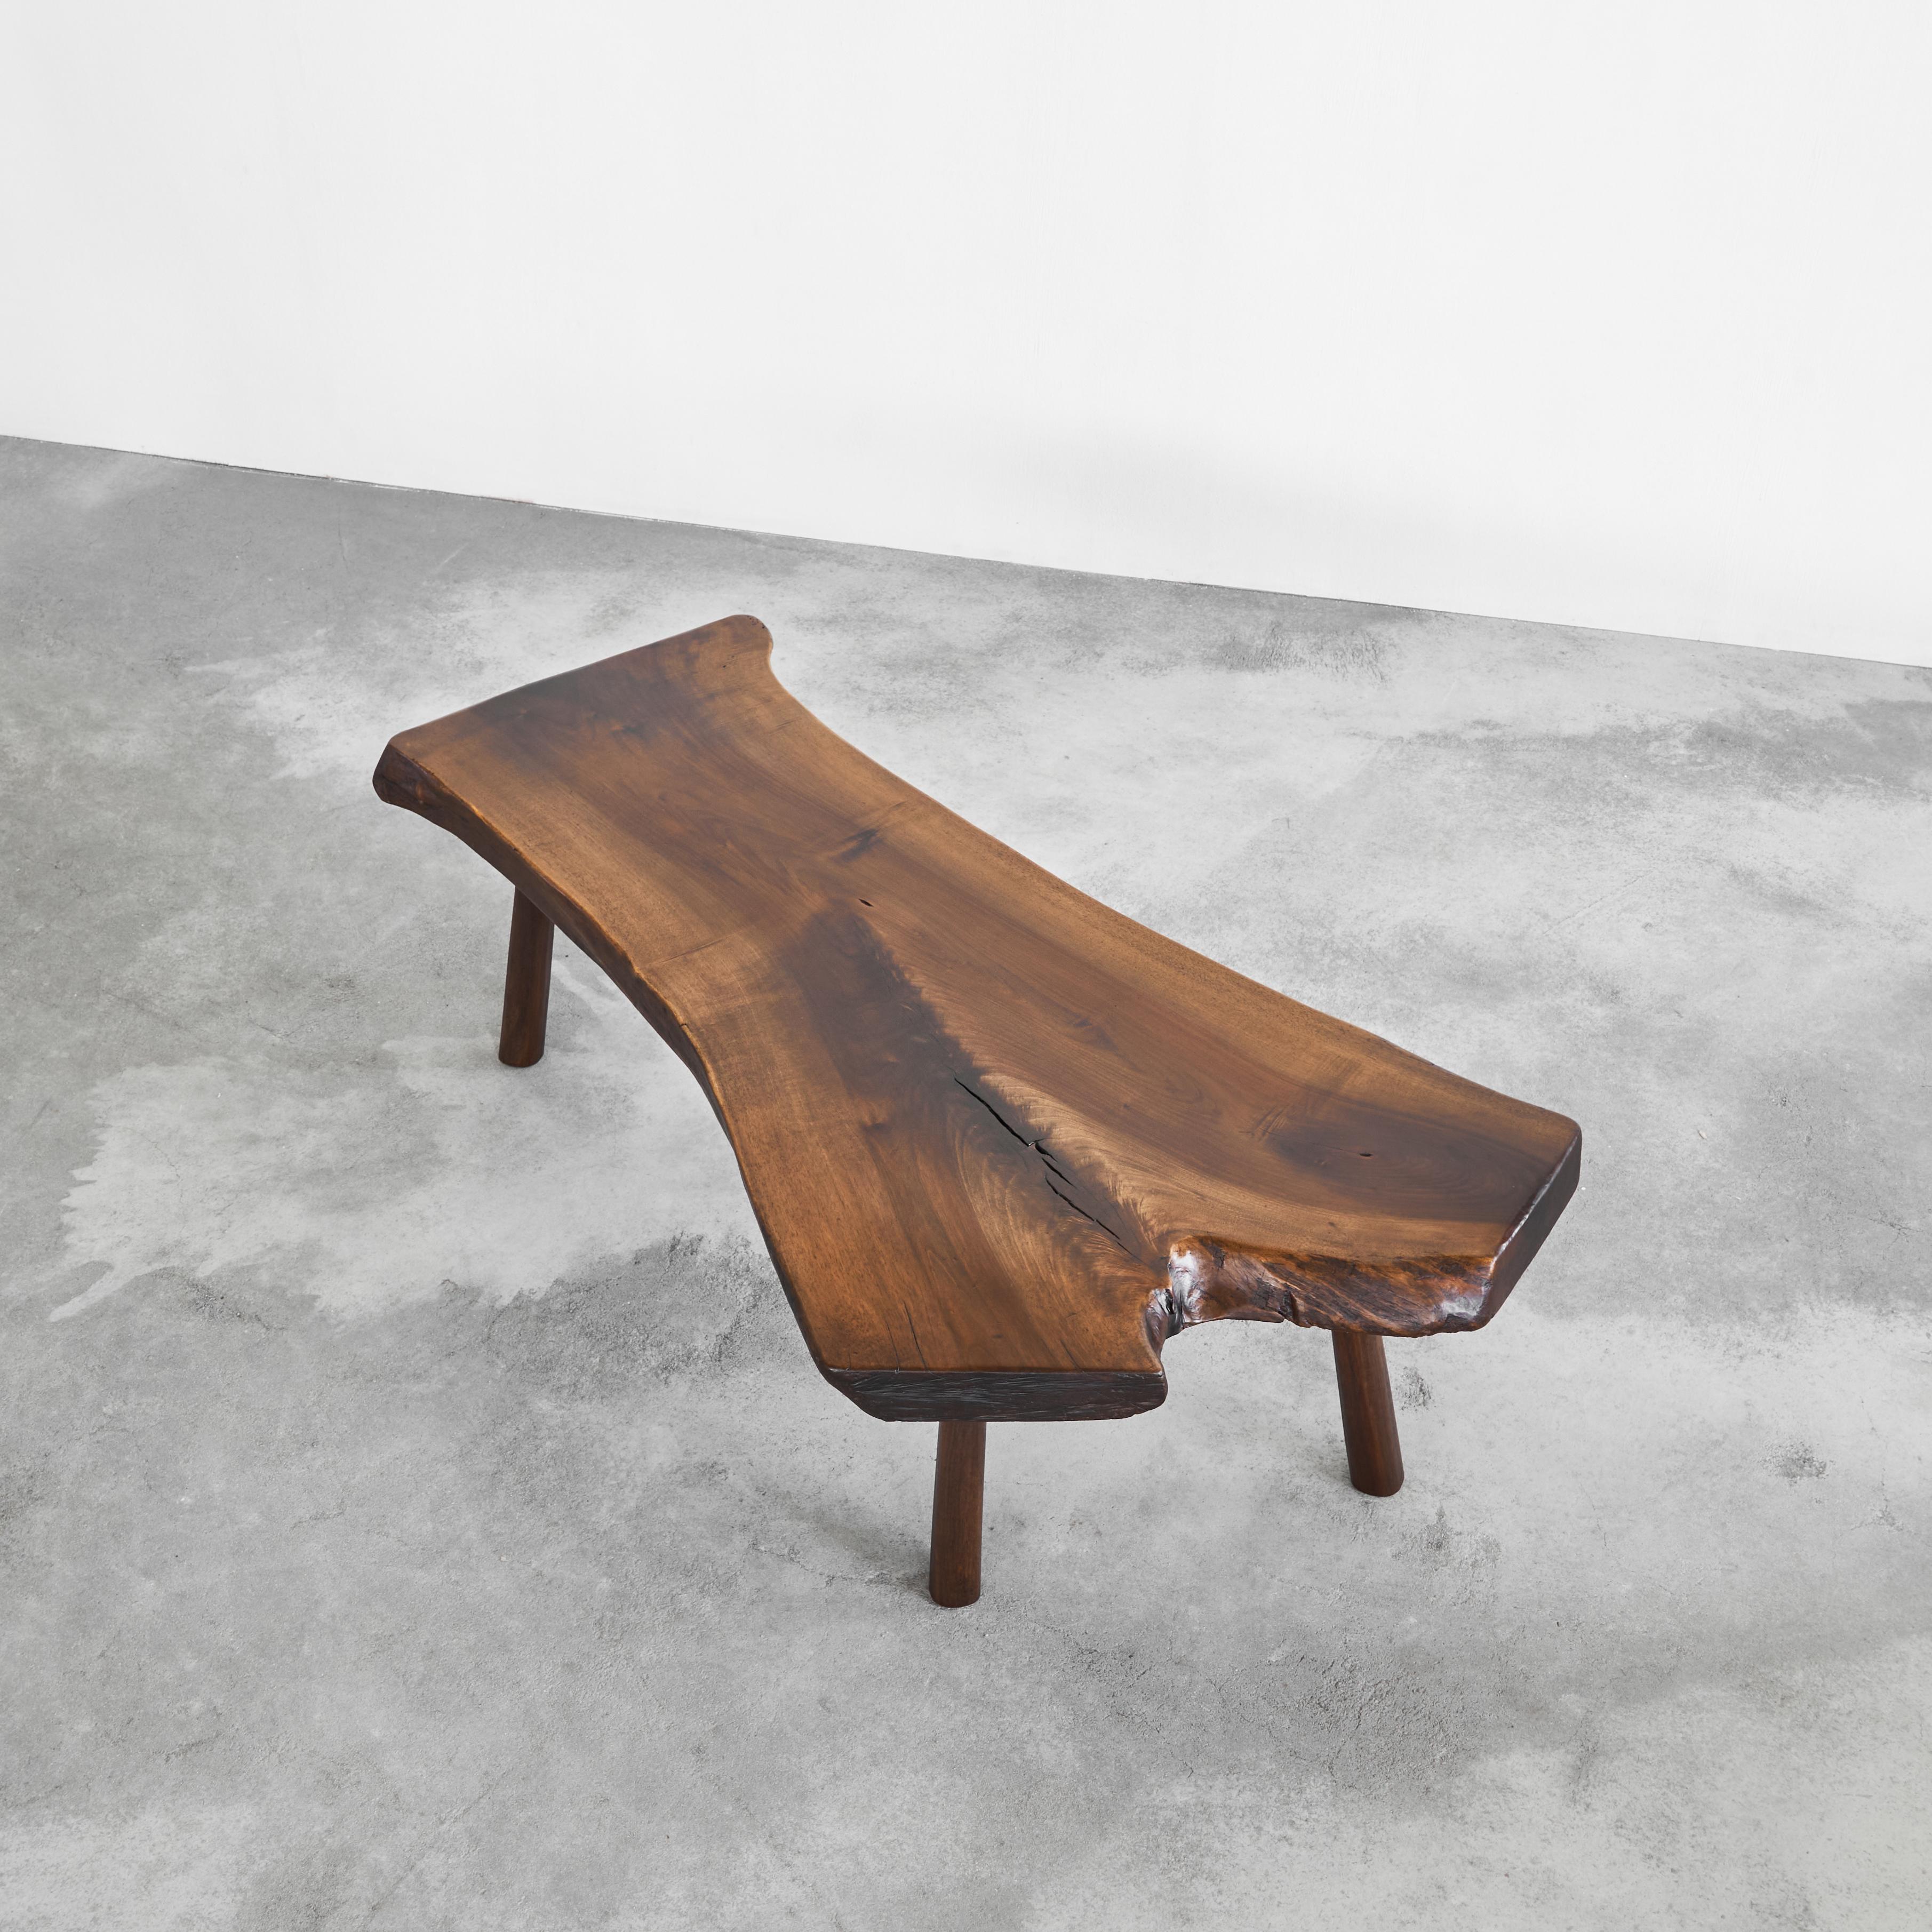 Midcentury Live Edge Coffee Table in Solid Walnut, Europe, 1950s. Fully restored. 

This is a stunning and very elegant live edge coffee table made out of solid walnut by a European cabinetmaker in the 1950s. Made on request for the first owner in